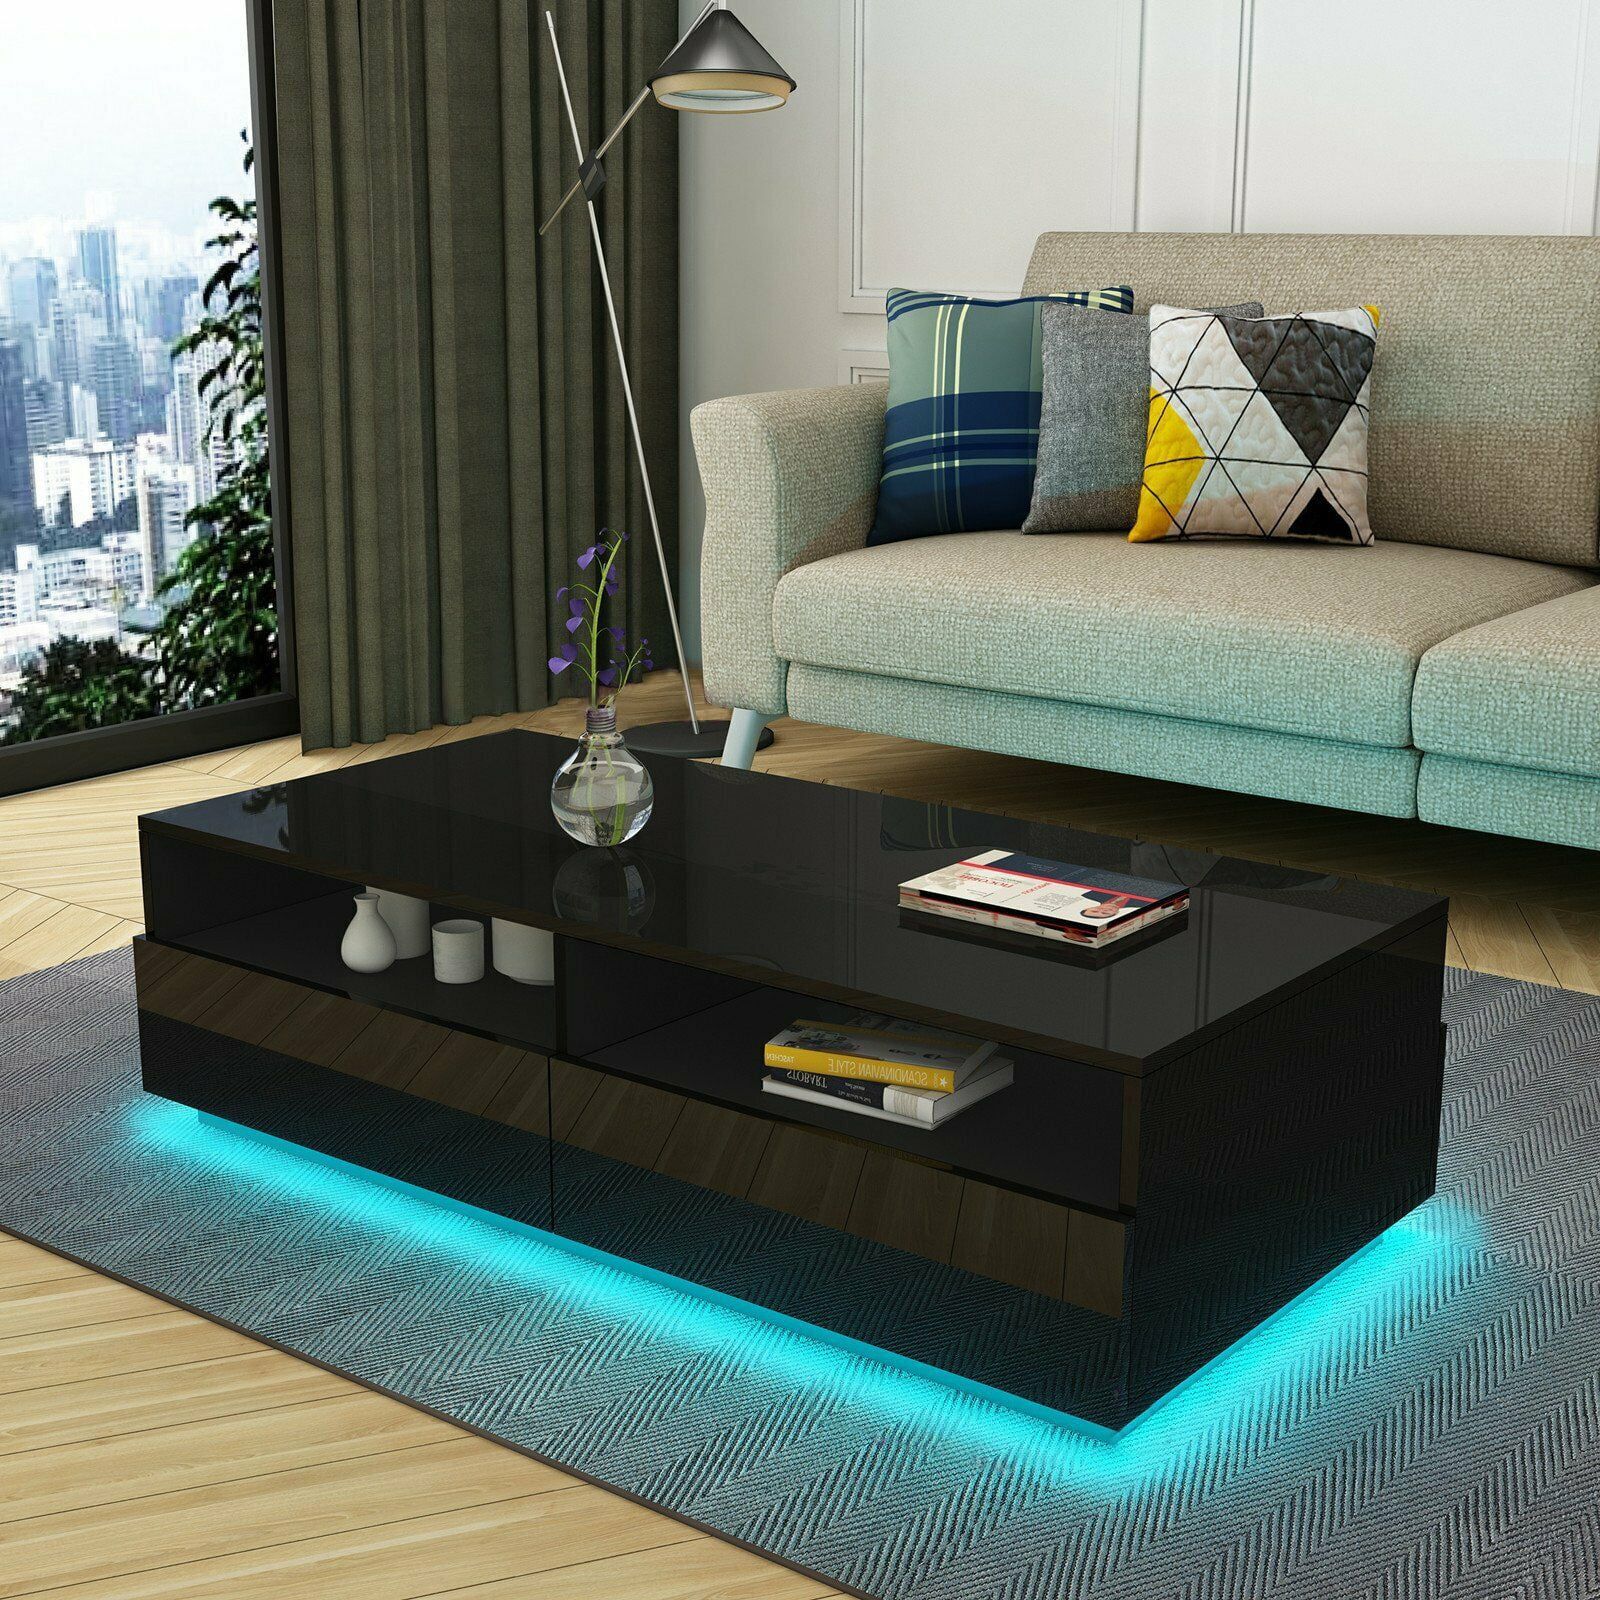 Led Rectangular Coffee Table Tea Modern Living Room Furniture Black Within Led Coffee Tables With 4 Drawers (View 19 of 20)